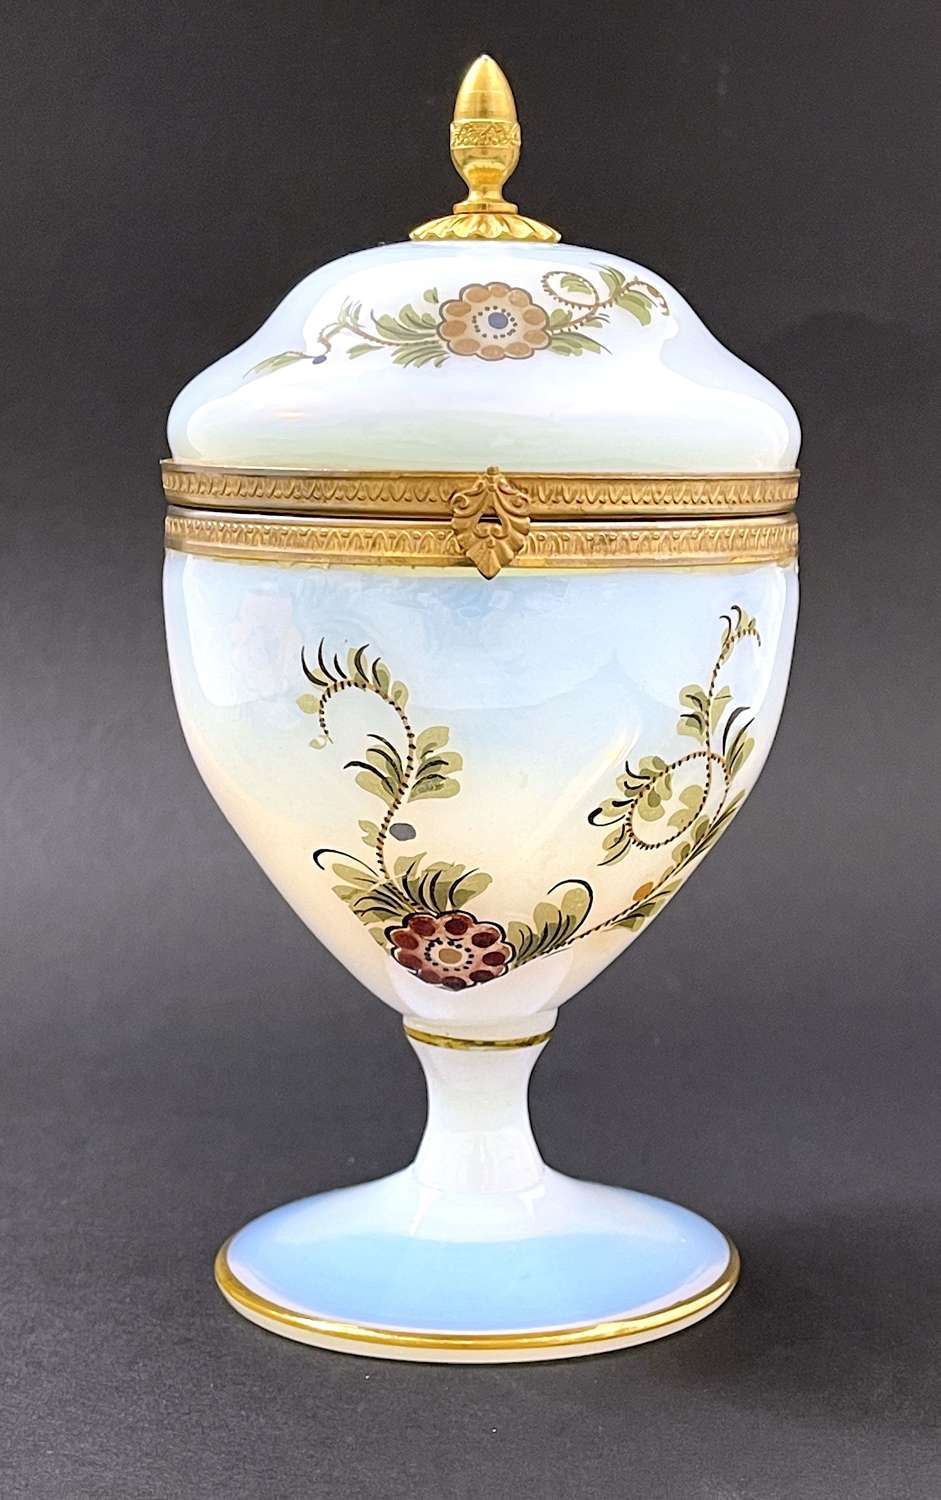 Unusual Antique French Bulle de Savon Opaline Glass Box with Flowers